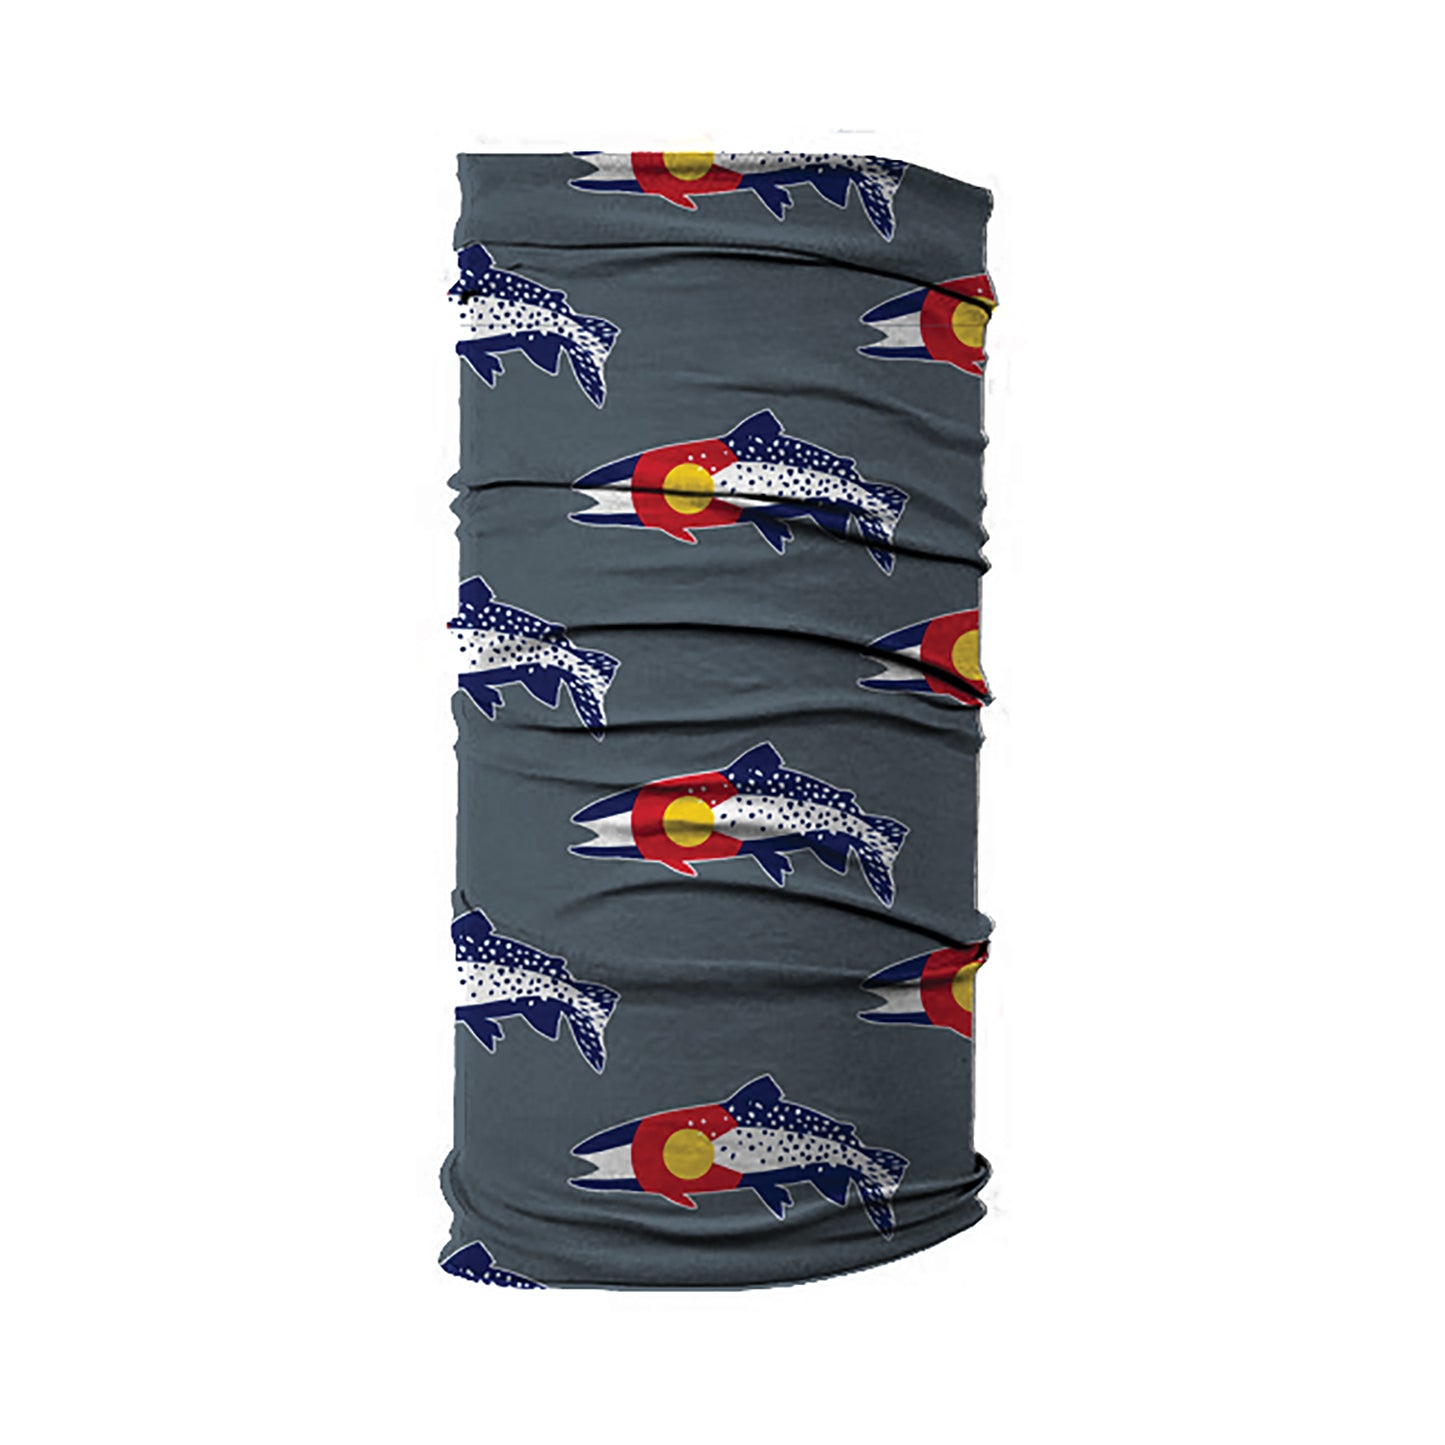 A gray neck tube has a pattern of trout in the colors of the colorado flag